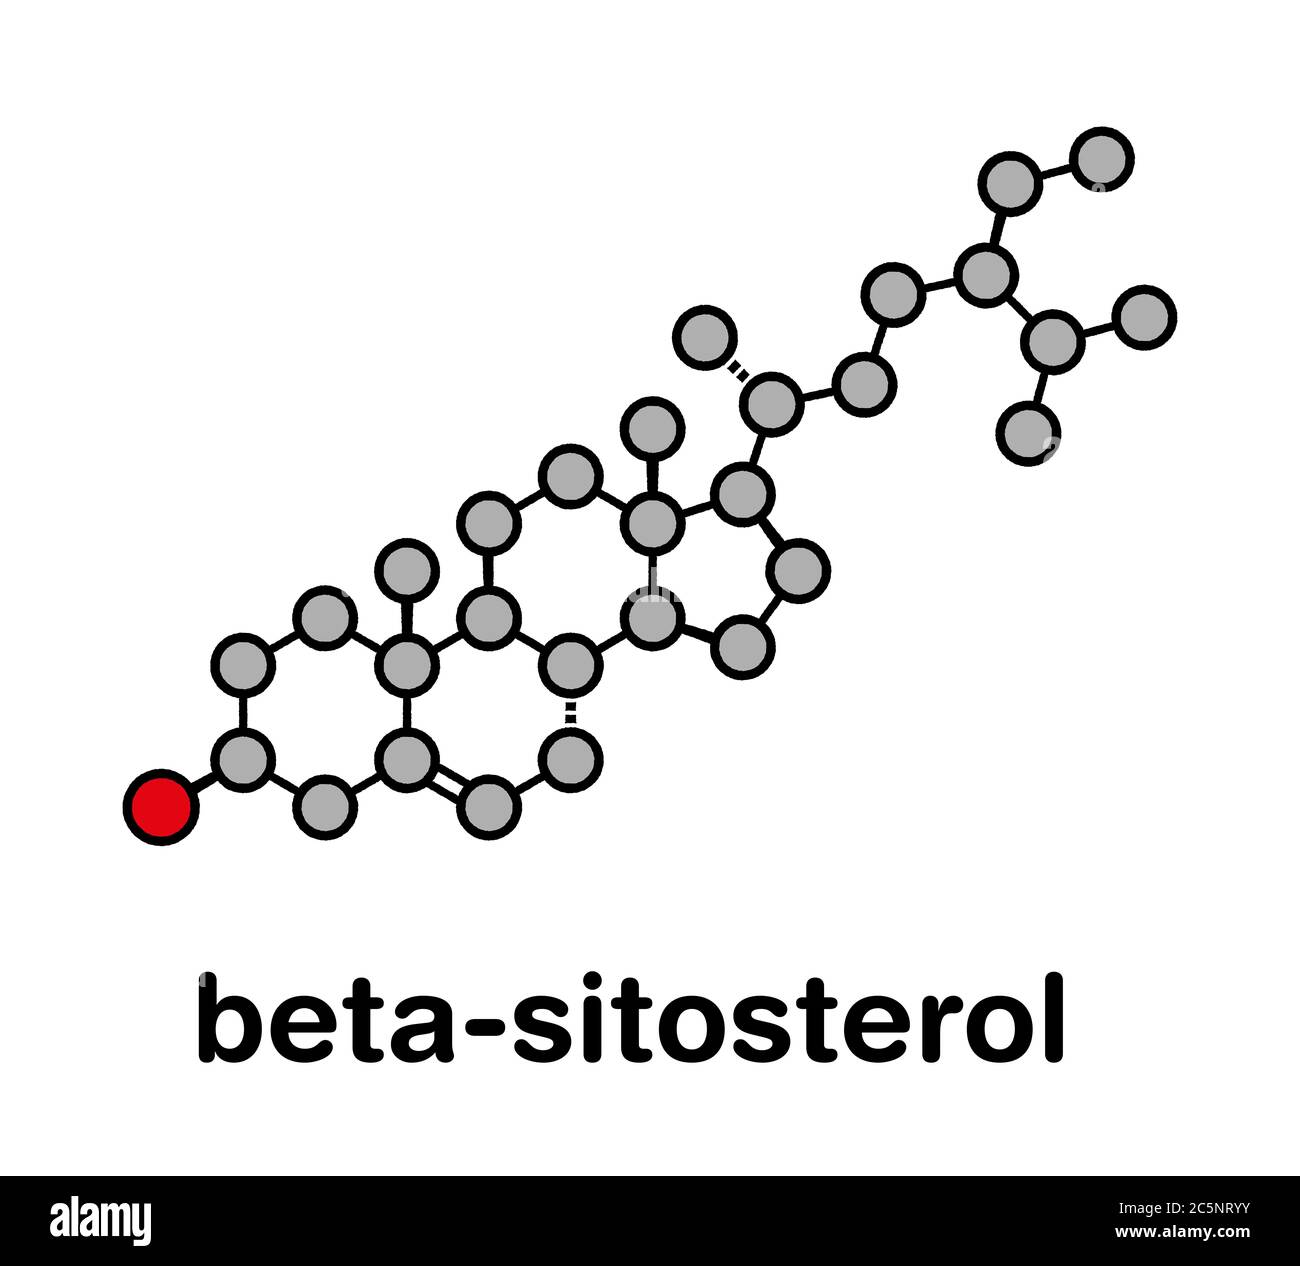 Beta-sitosterol phytosterol molecule. Investigated in treatment of benign prostate hyperplasia (BPH) and high cholesterol levels. Stylized skeletal formula (chemical structure): Atoms are shown as color-coded circles: hydrogen (hidden), carbon (grey), oxygen (red). Stock Photo